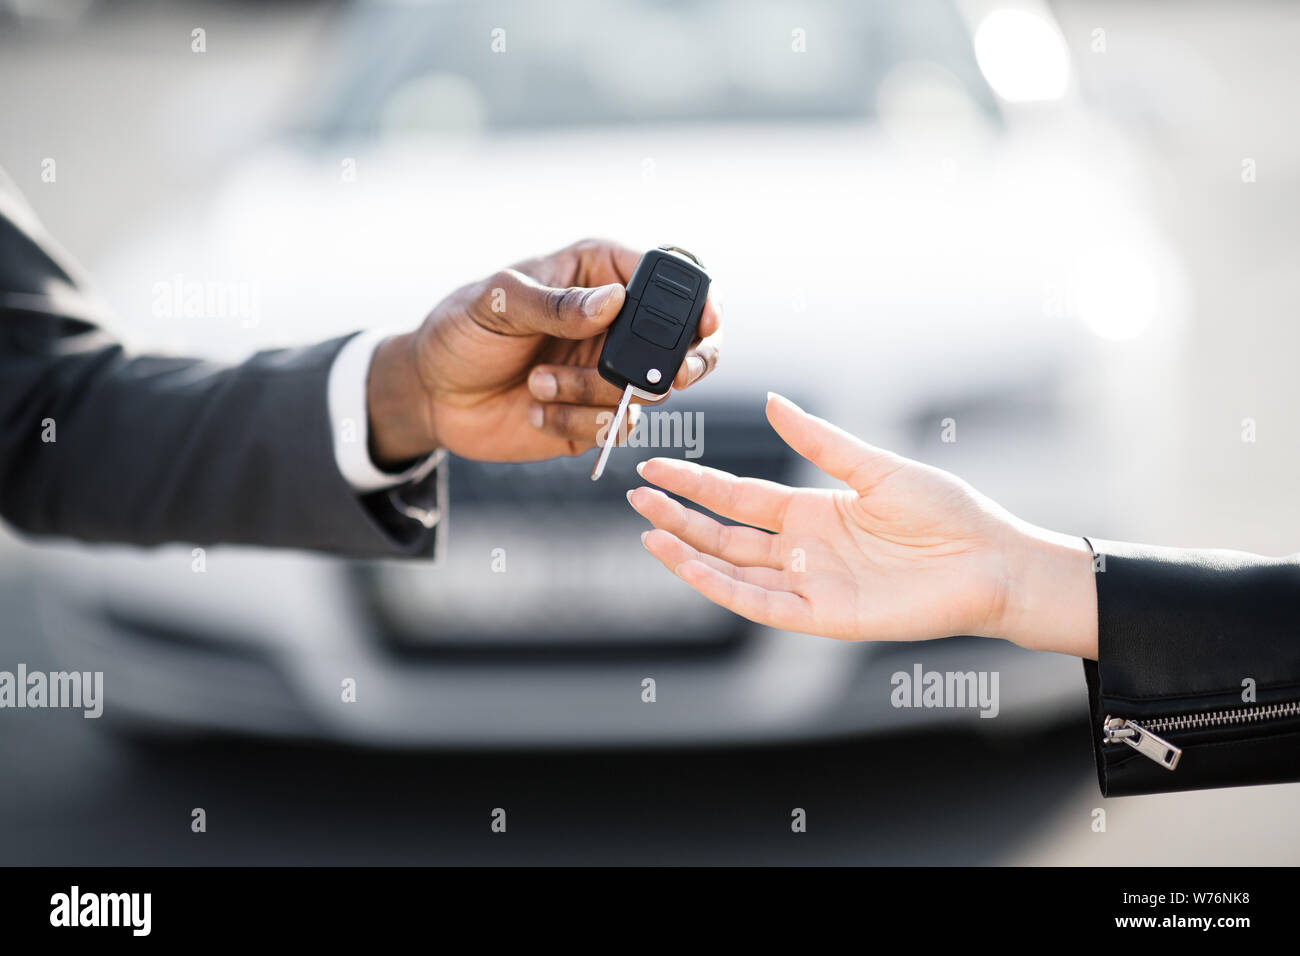 Car salesman handing over keys for new car to young woman Stock Photo